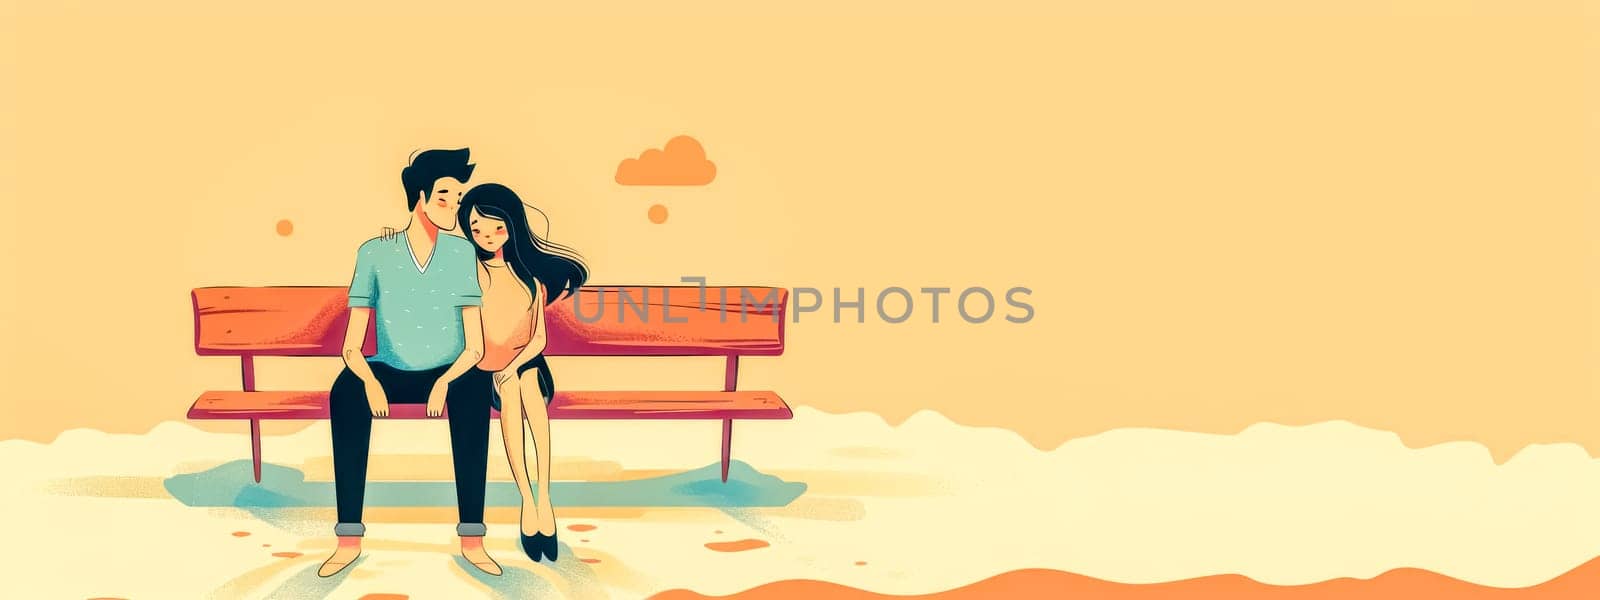 Illustrated young couple in love sitting on a bench with a warm sunset background